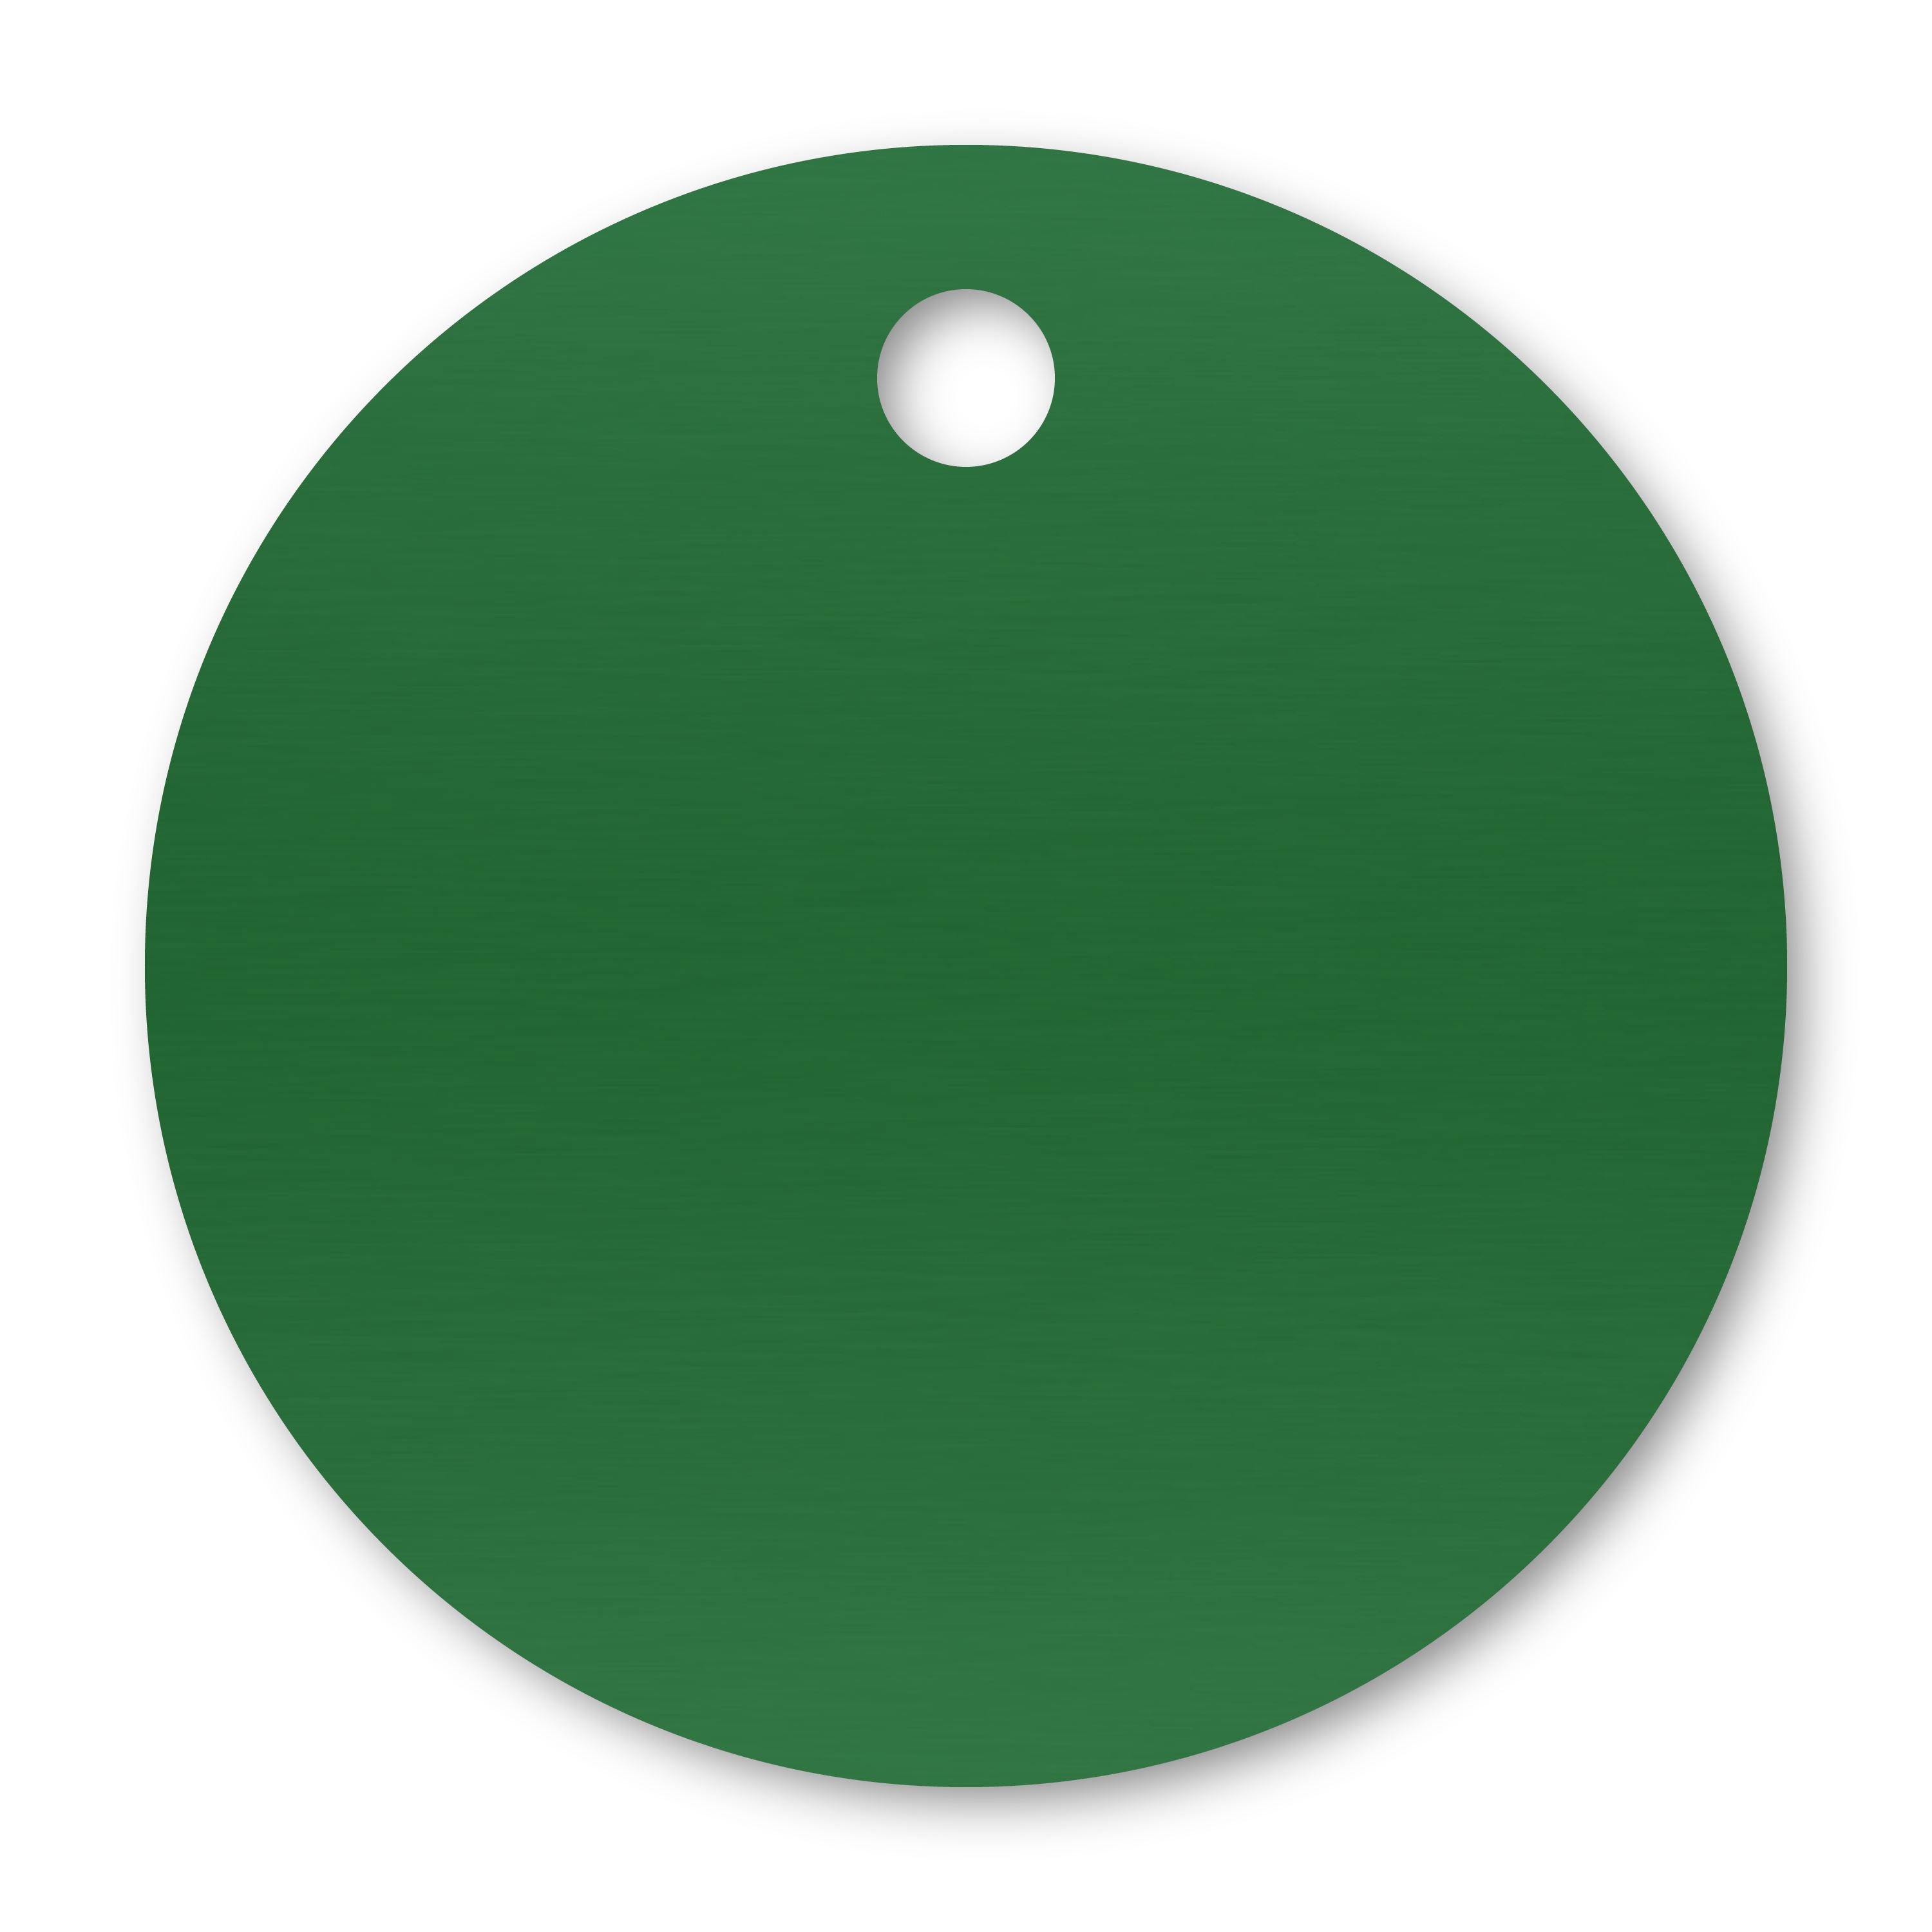 Anodized Aluminum Round Tags, 1-1/8" with 1/8" Hole, Laser Engraved Metal Tags Craftworks NW Green 